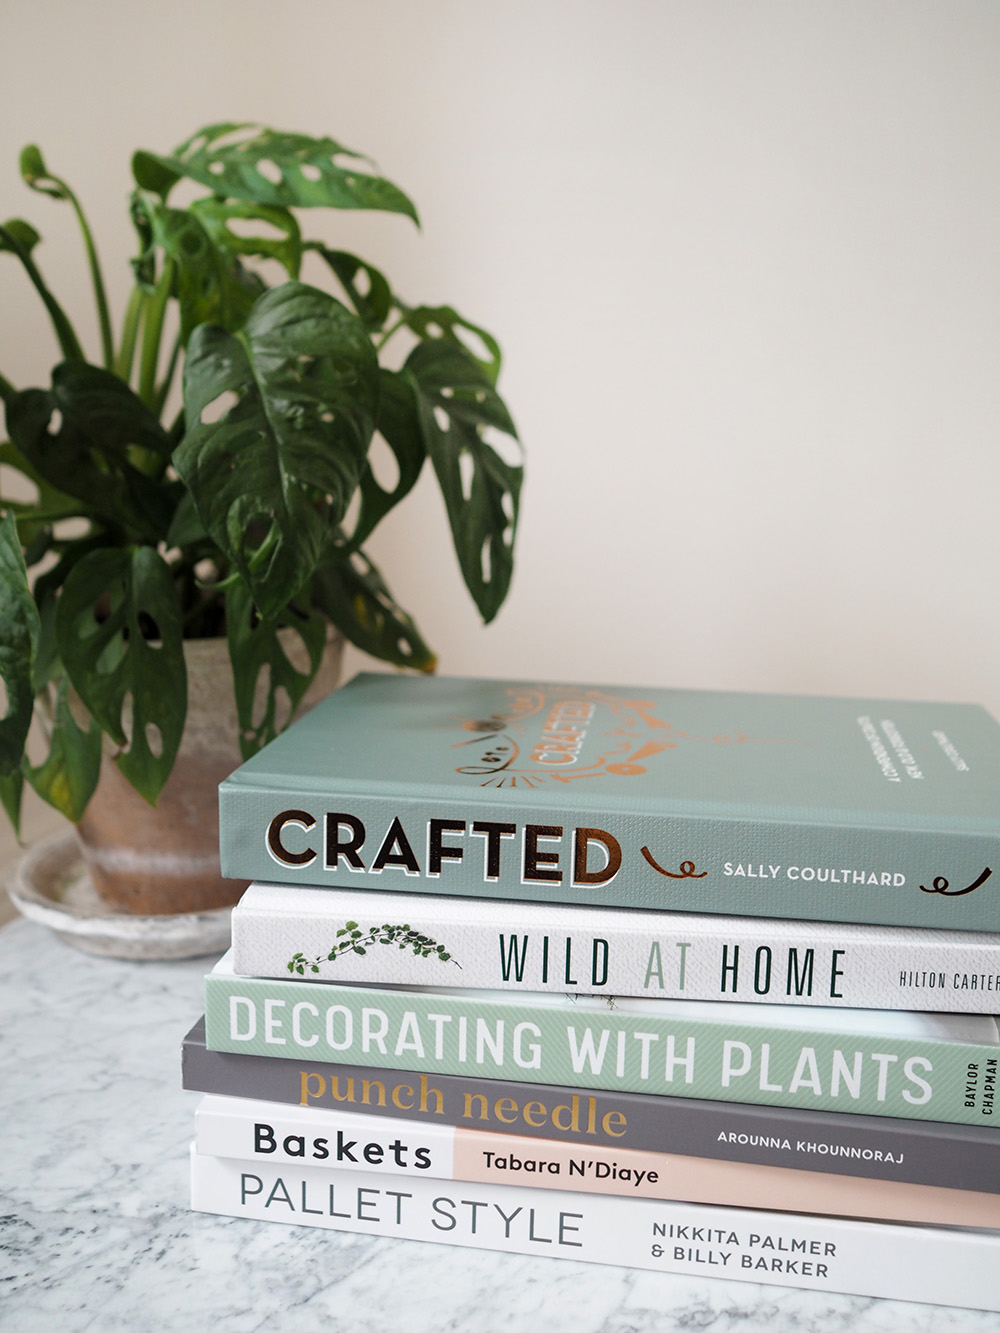 91 Magazine's top 6 craft, interiors and lifestyle books for summer 2019